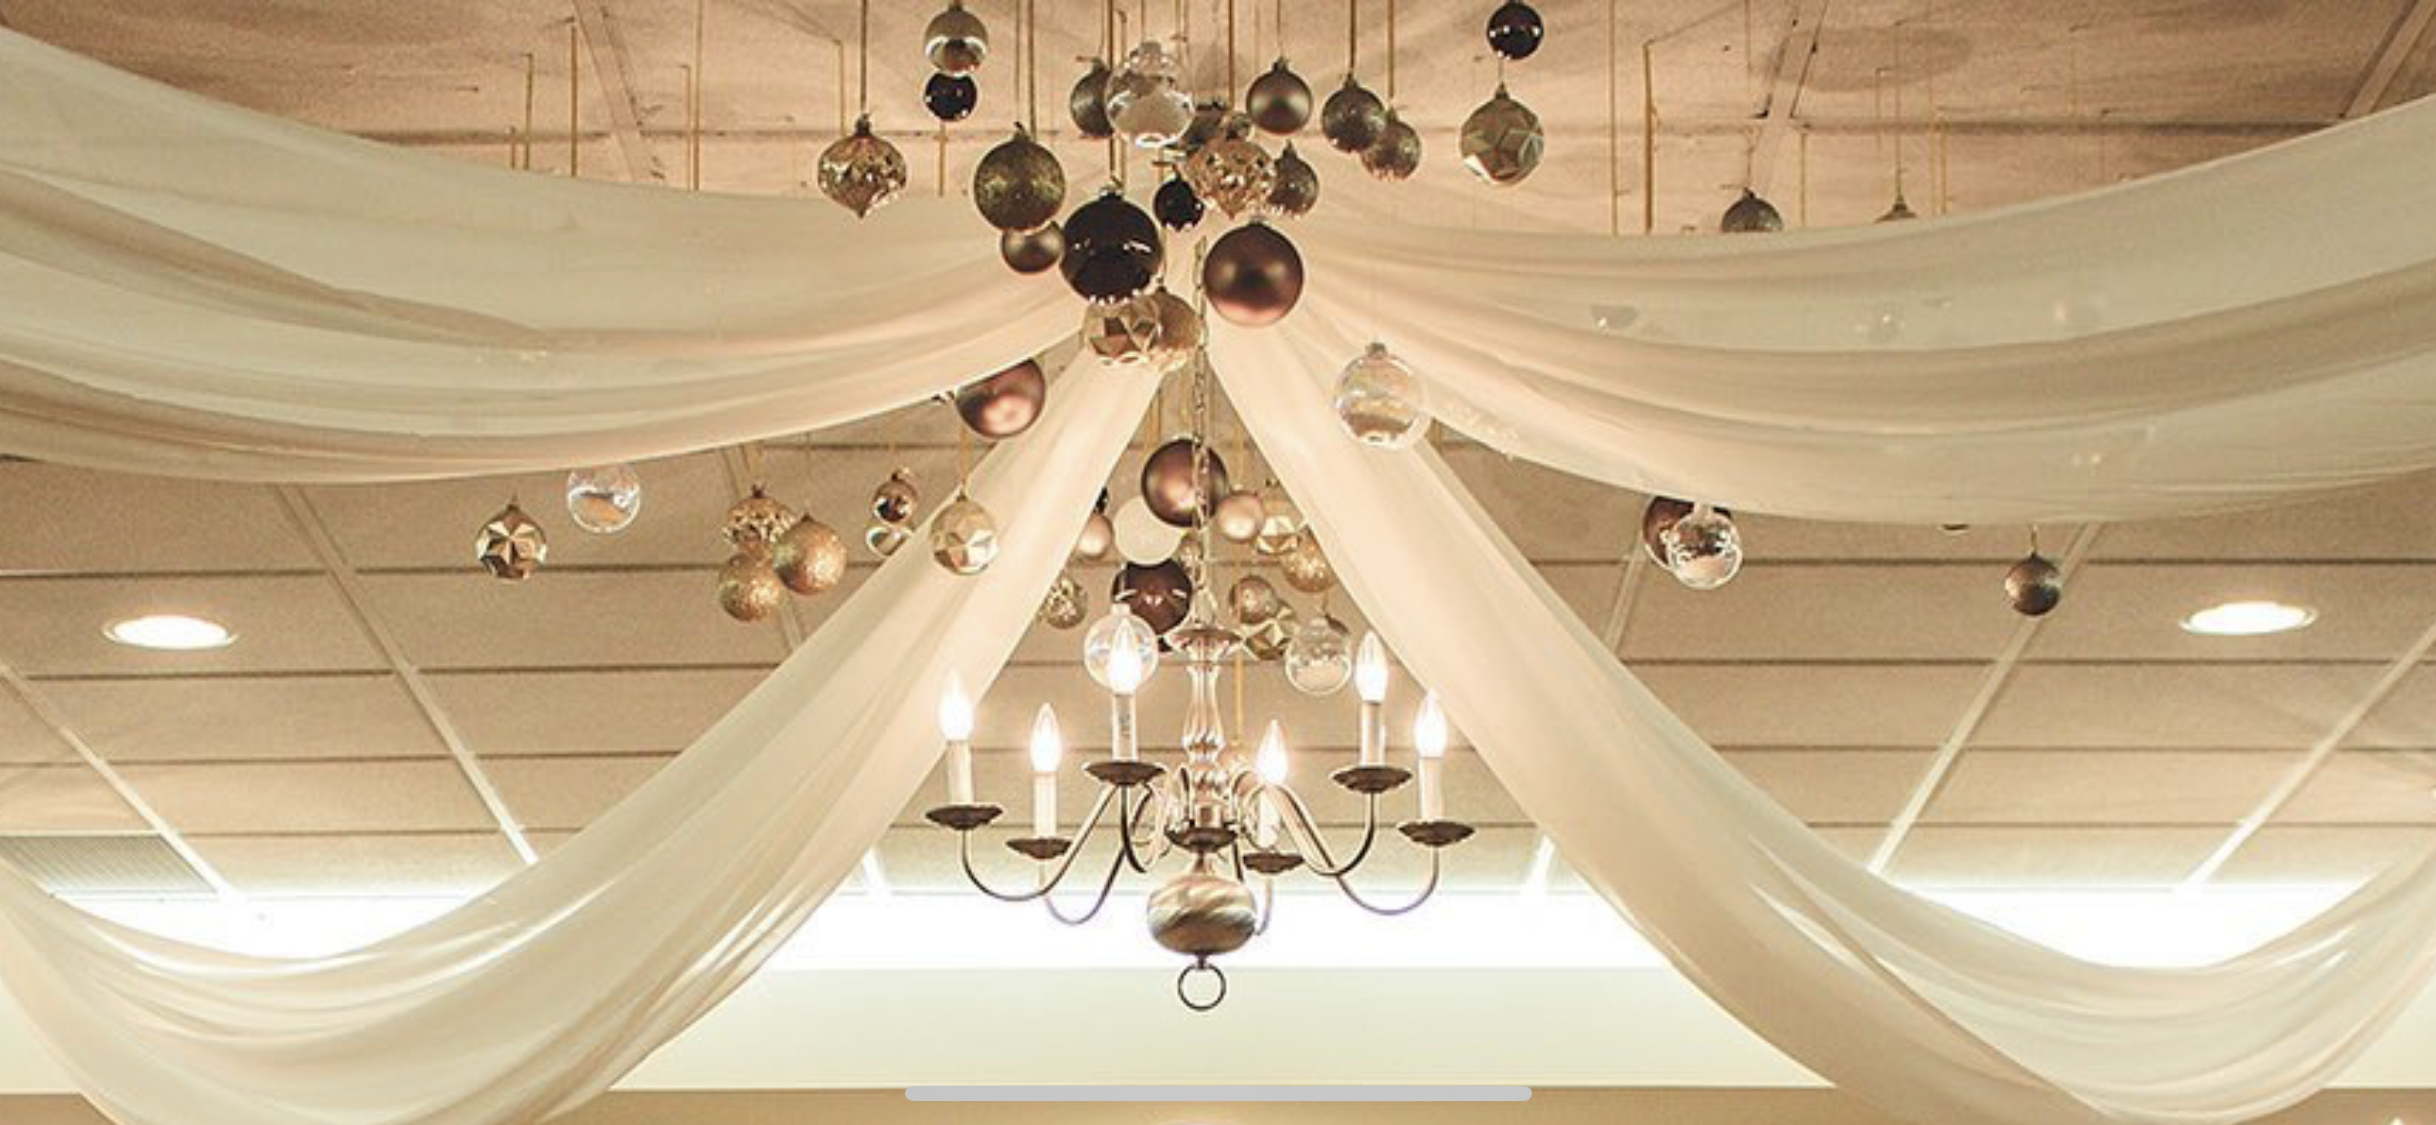 Gorgeous chandalier and hanging decor for a wedding reception.